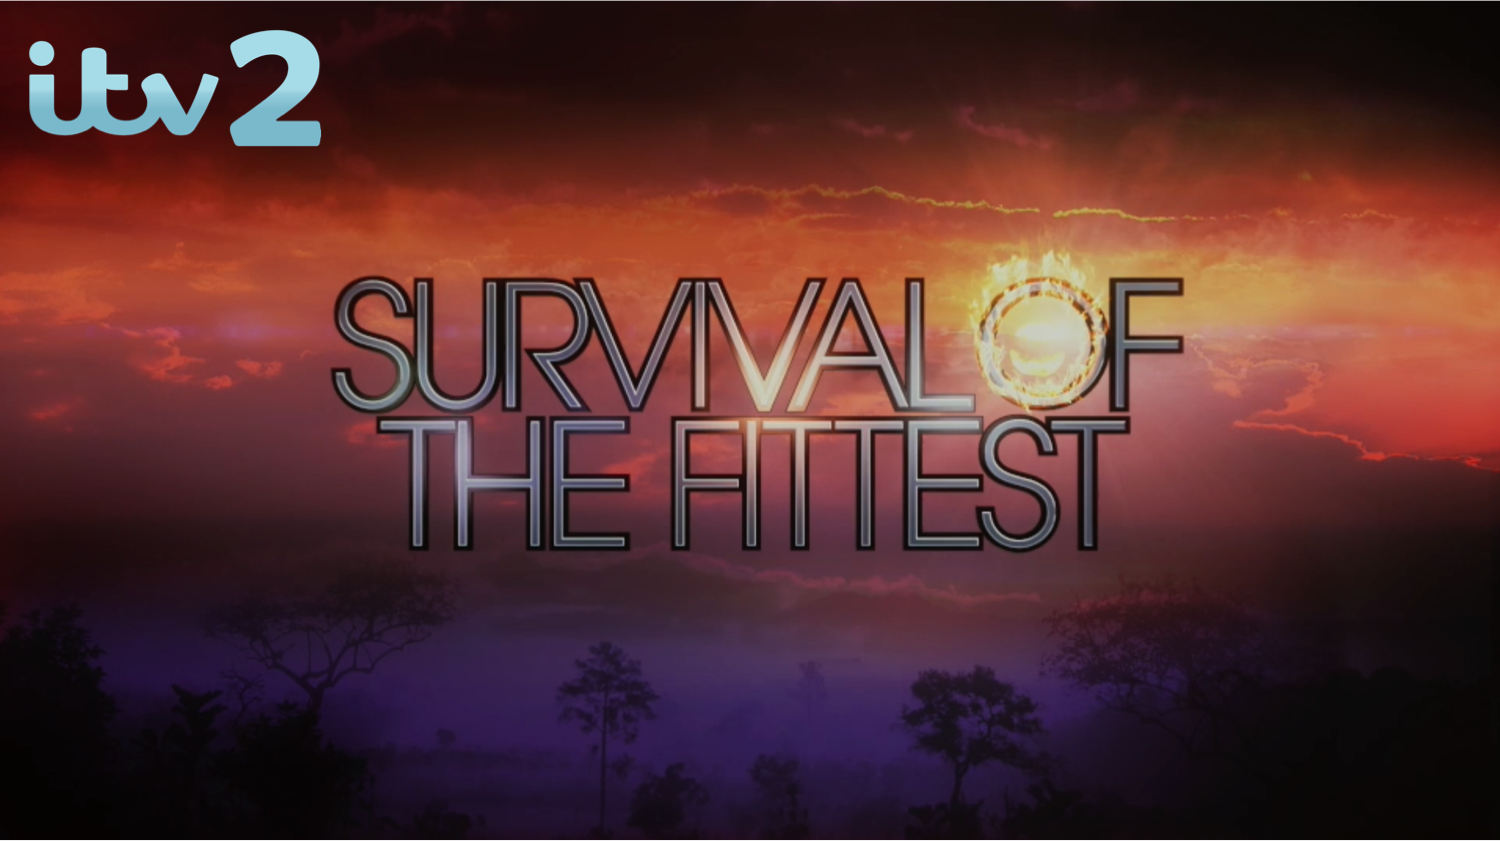 A-MNEMONIC Compose The Music for New ITV2 Show ‘Survival Of The Fittest’